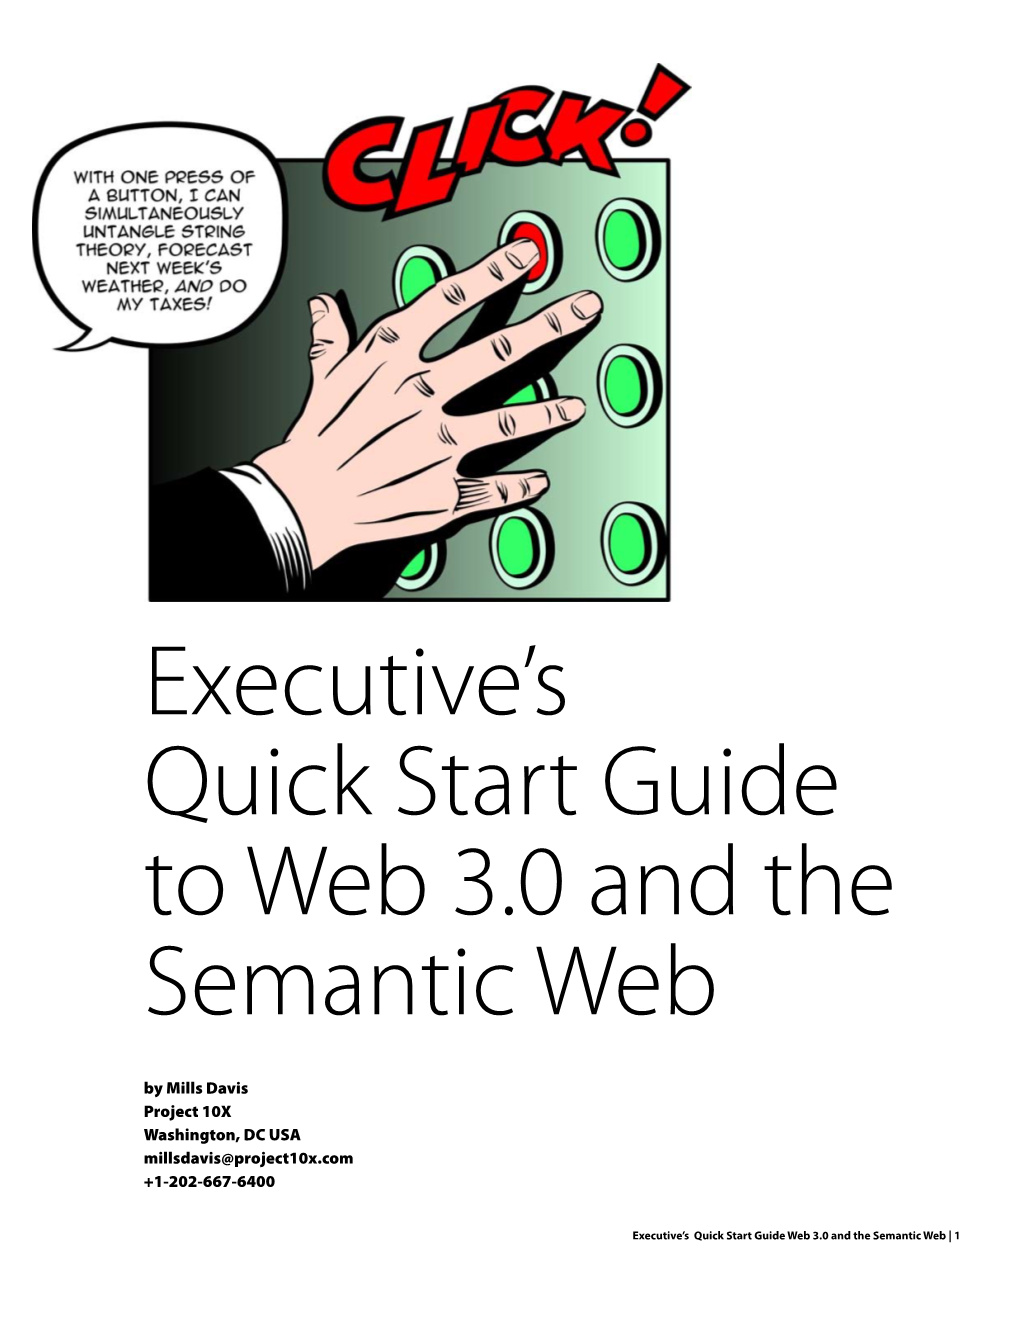 Executive's Quick Start Guide to Web 3.0 and the Semantic